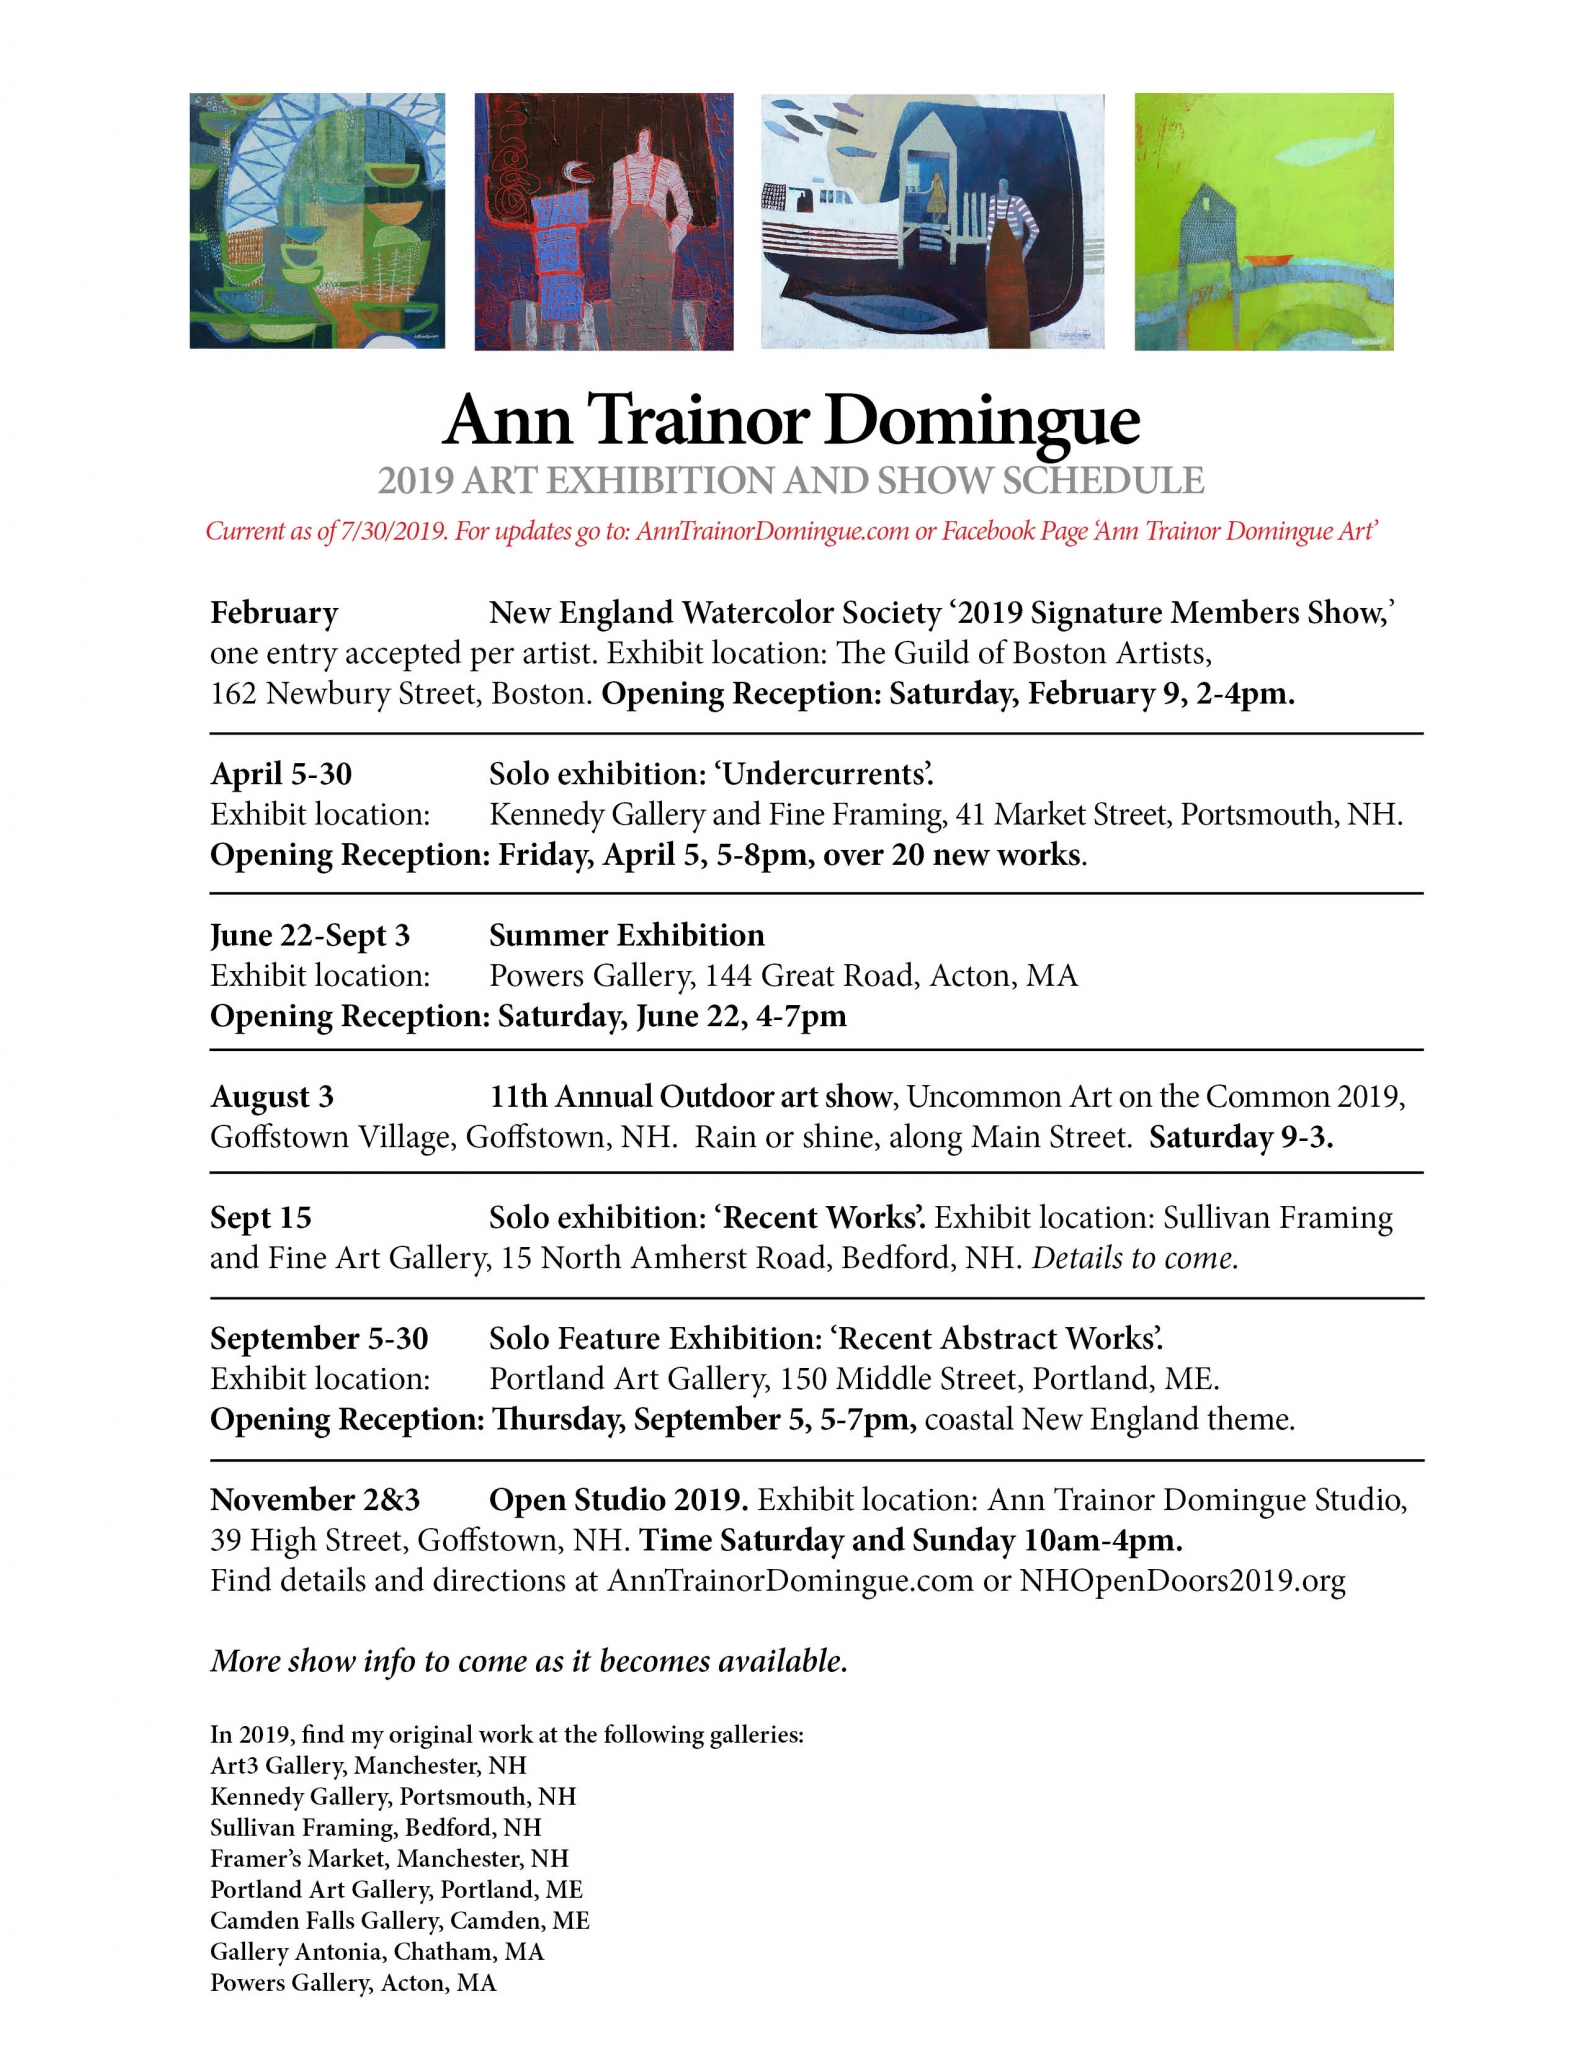 Click here to view 2019 show schedule Jul30 by Ann Trainor Domingue